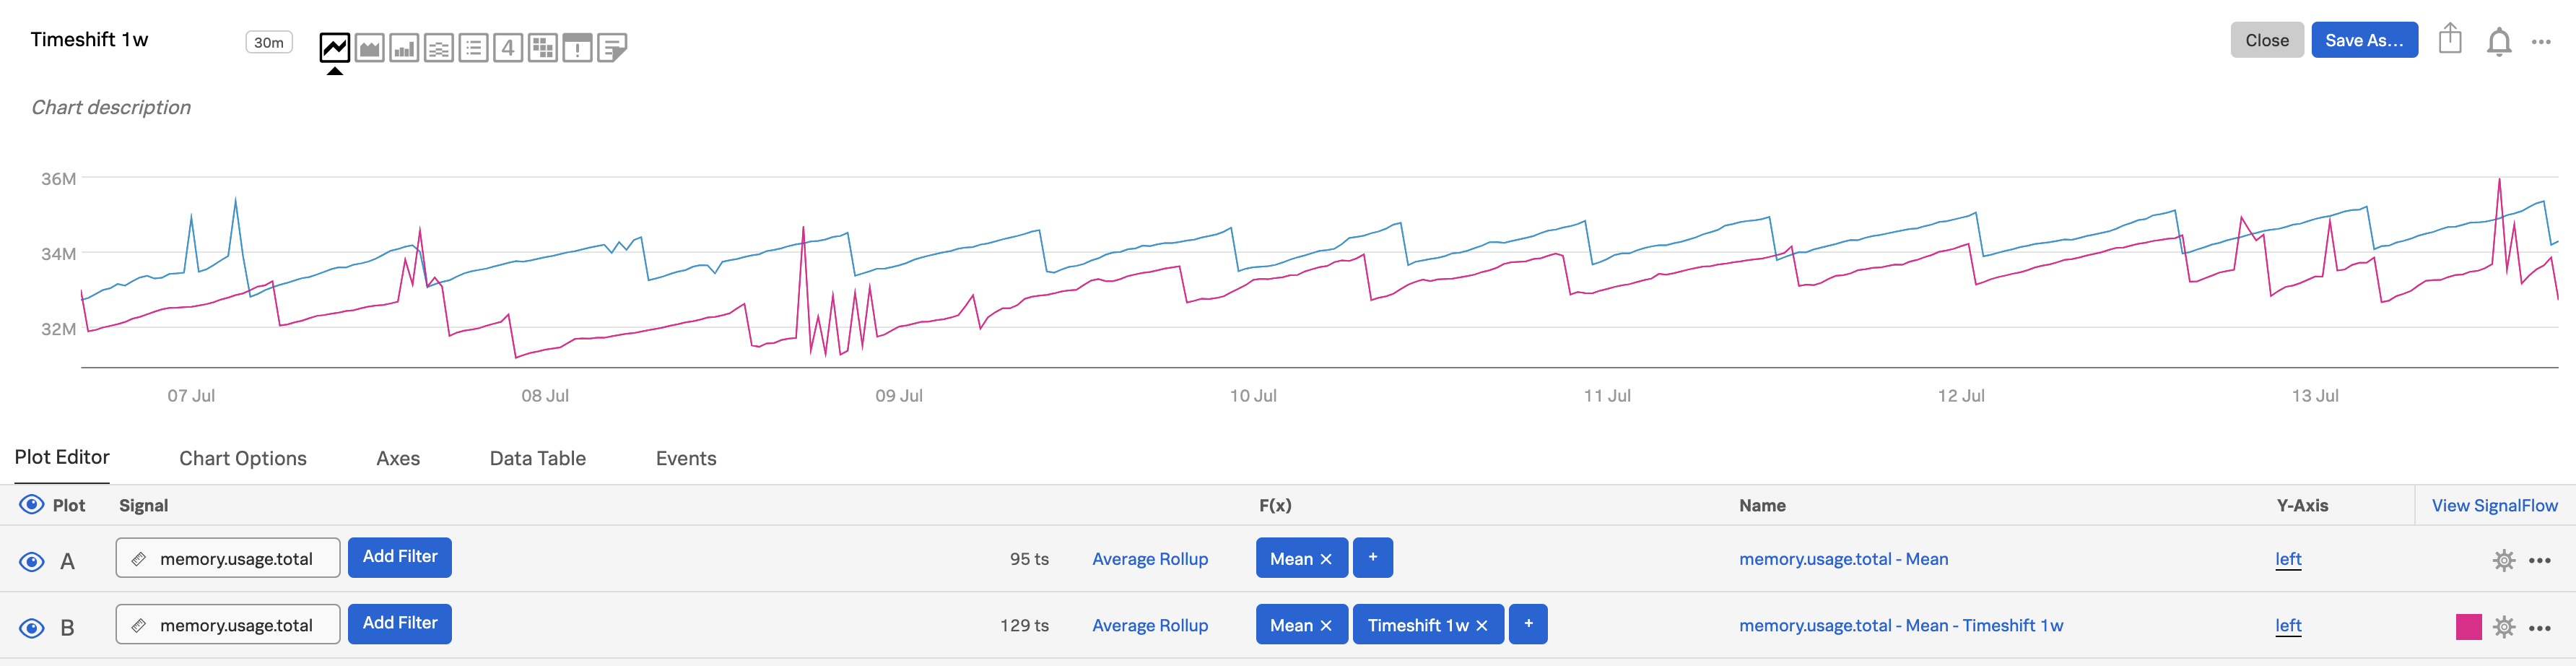 This screenshot shows how the one week time range over the change matters, which is memory.usage.total in the example